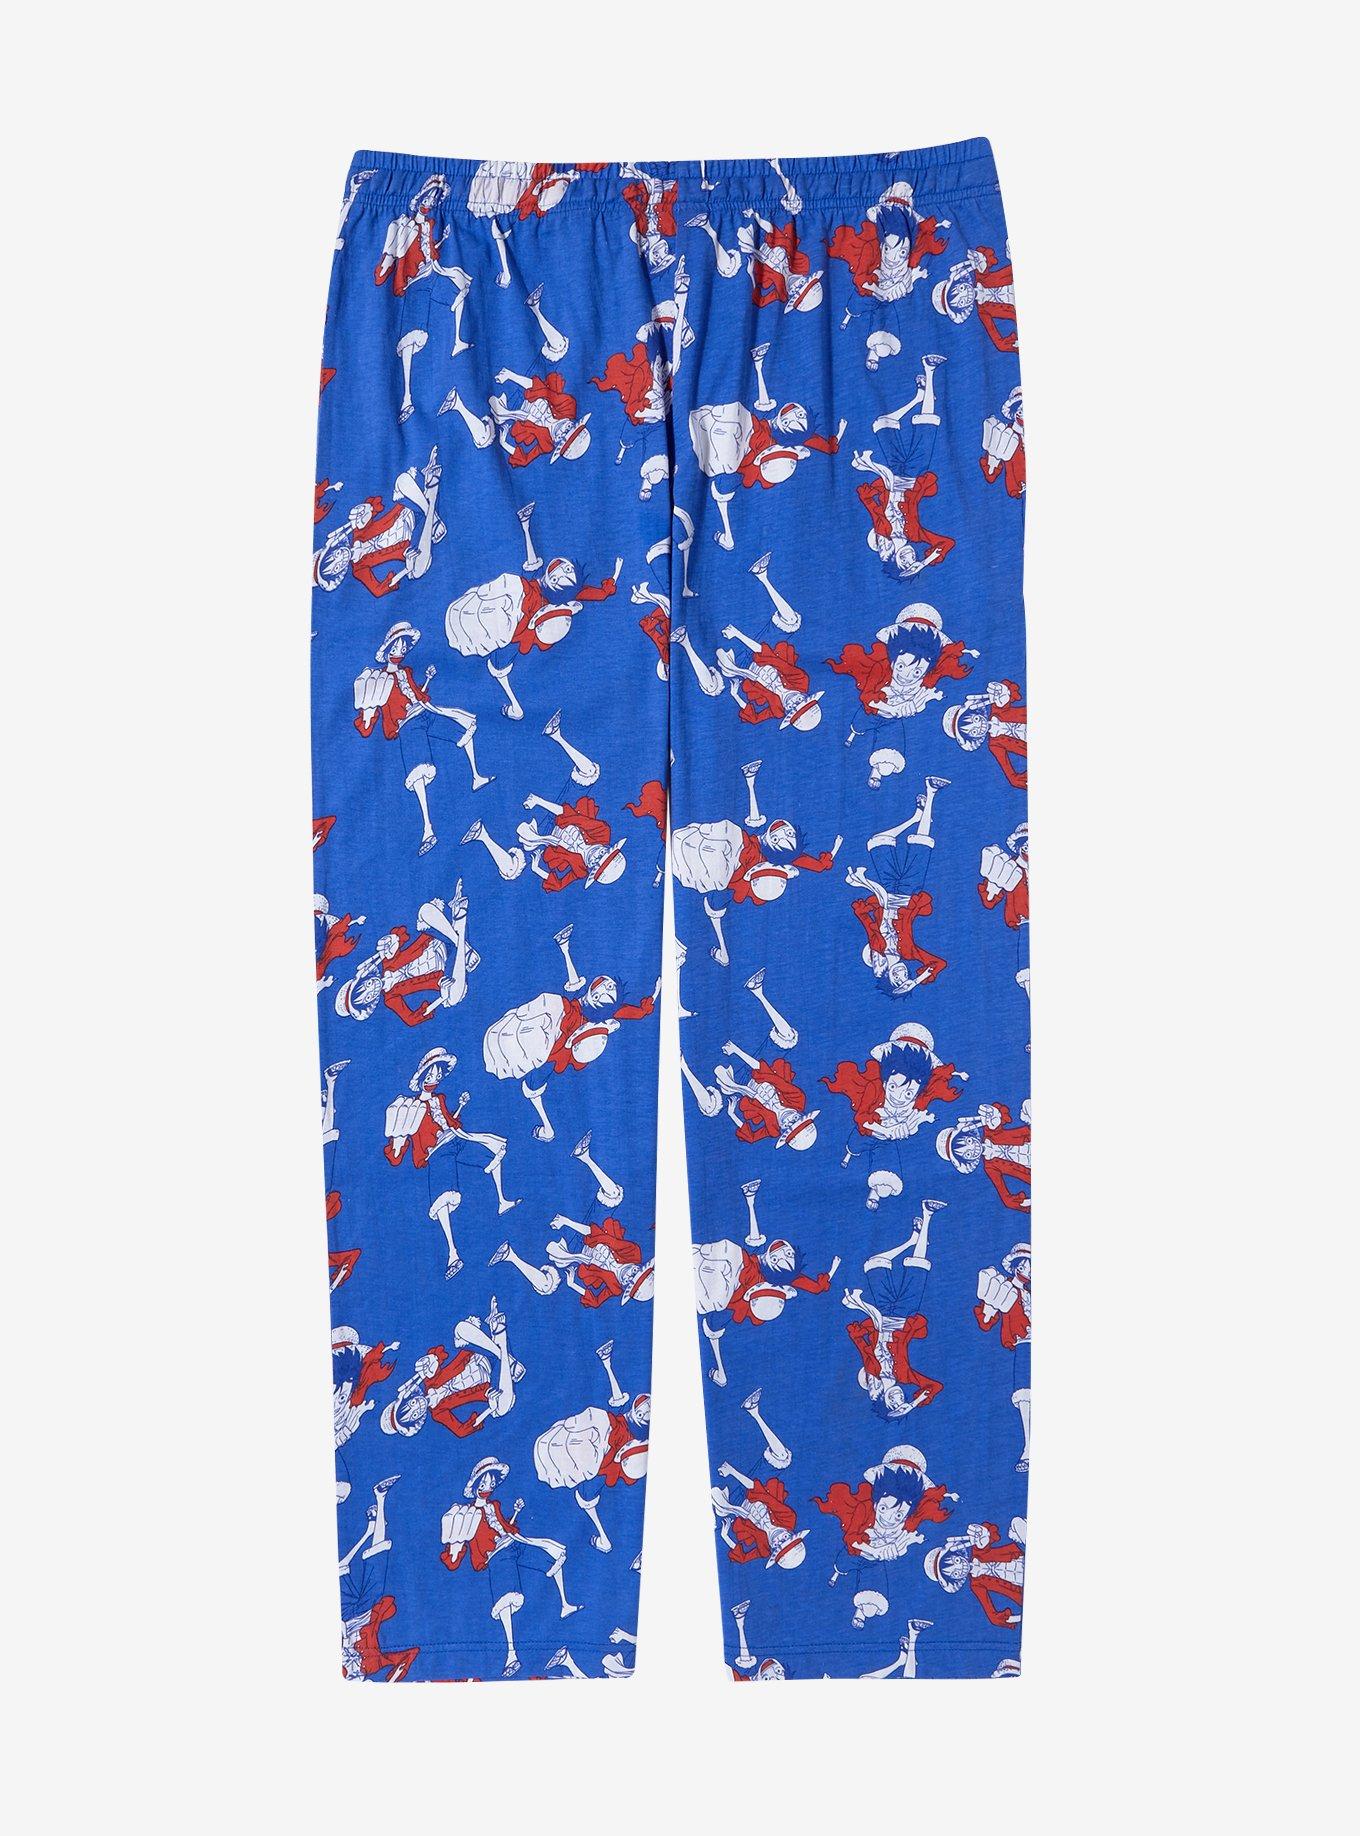 One Piece Monkey D. Luffy Poses Sleep Pants - BoxLunch Exclusive, BLUE, alternate